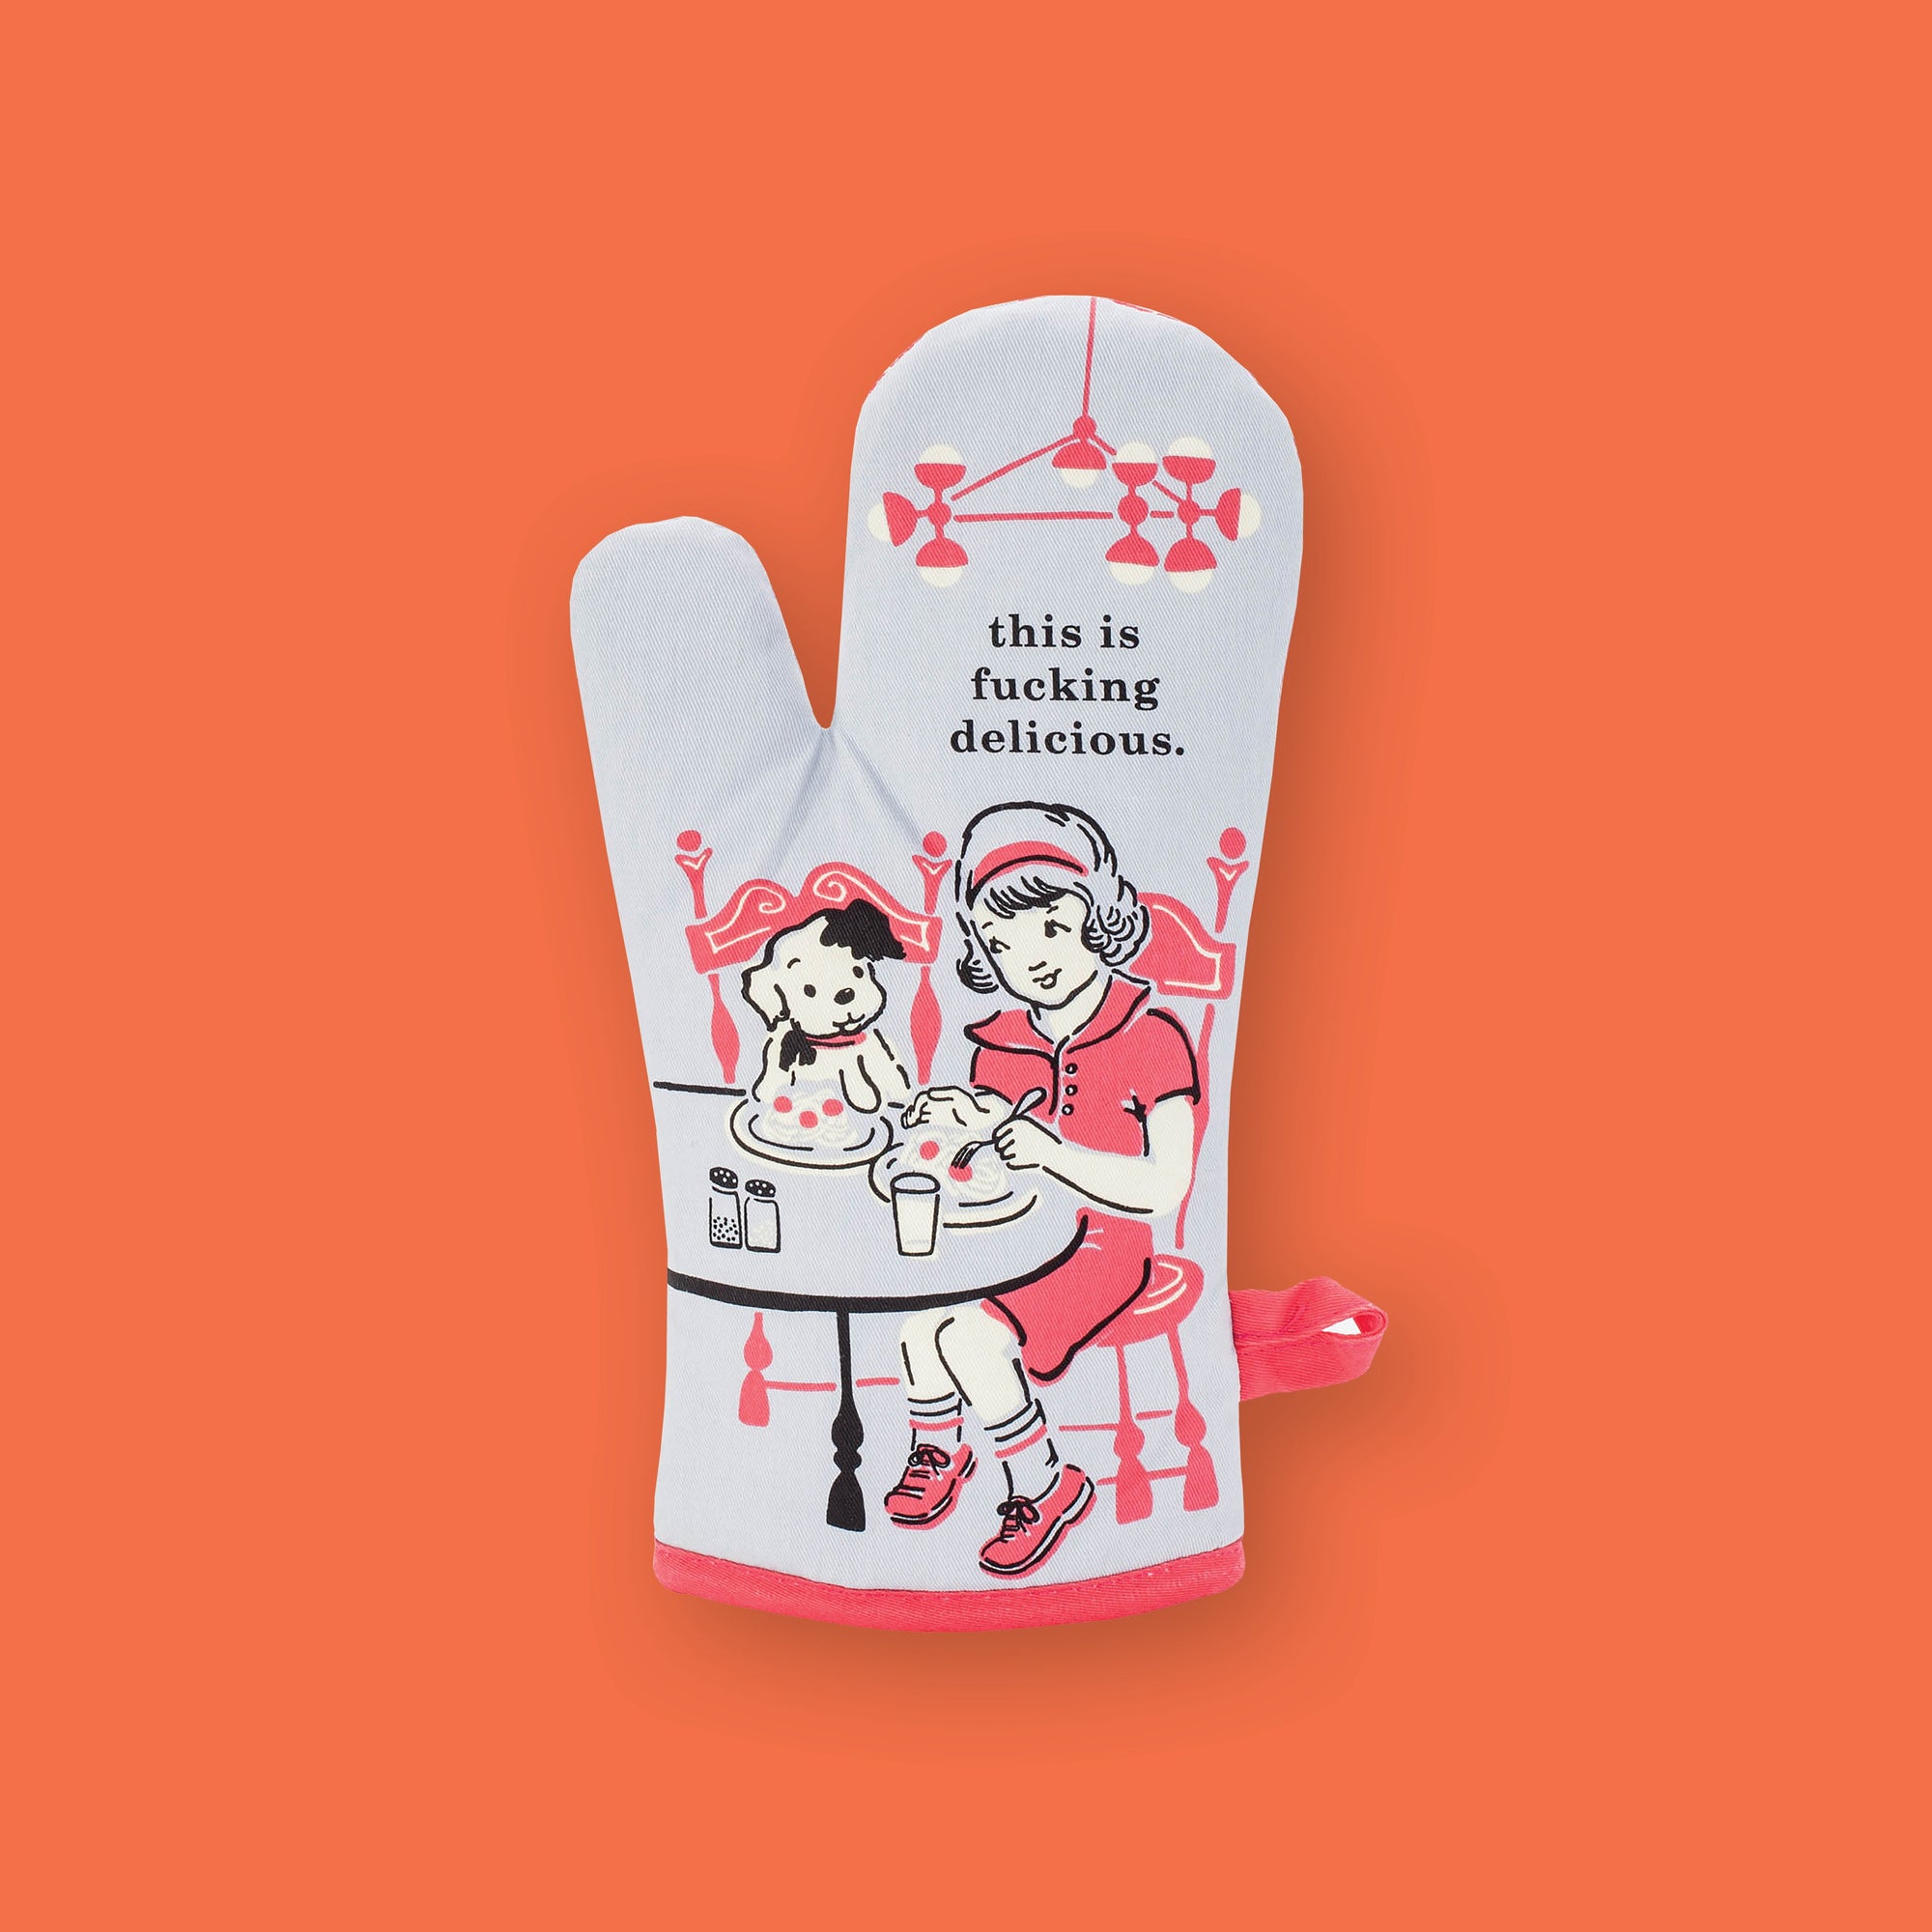 On an orangey-red background sits an oven mitt. This oven mitt has a vintage style illustration of a young girl sitting at a table eating spaghetti wiht her black and white dog. The colors are in light red, black, and white. It says "this is fucking delicious." in black, serif font.